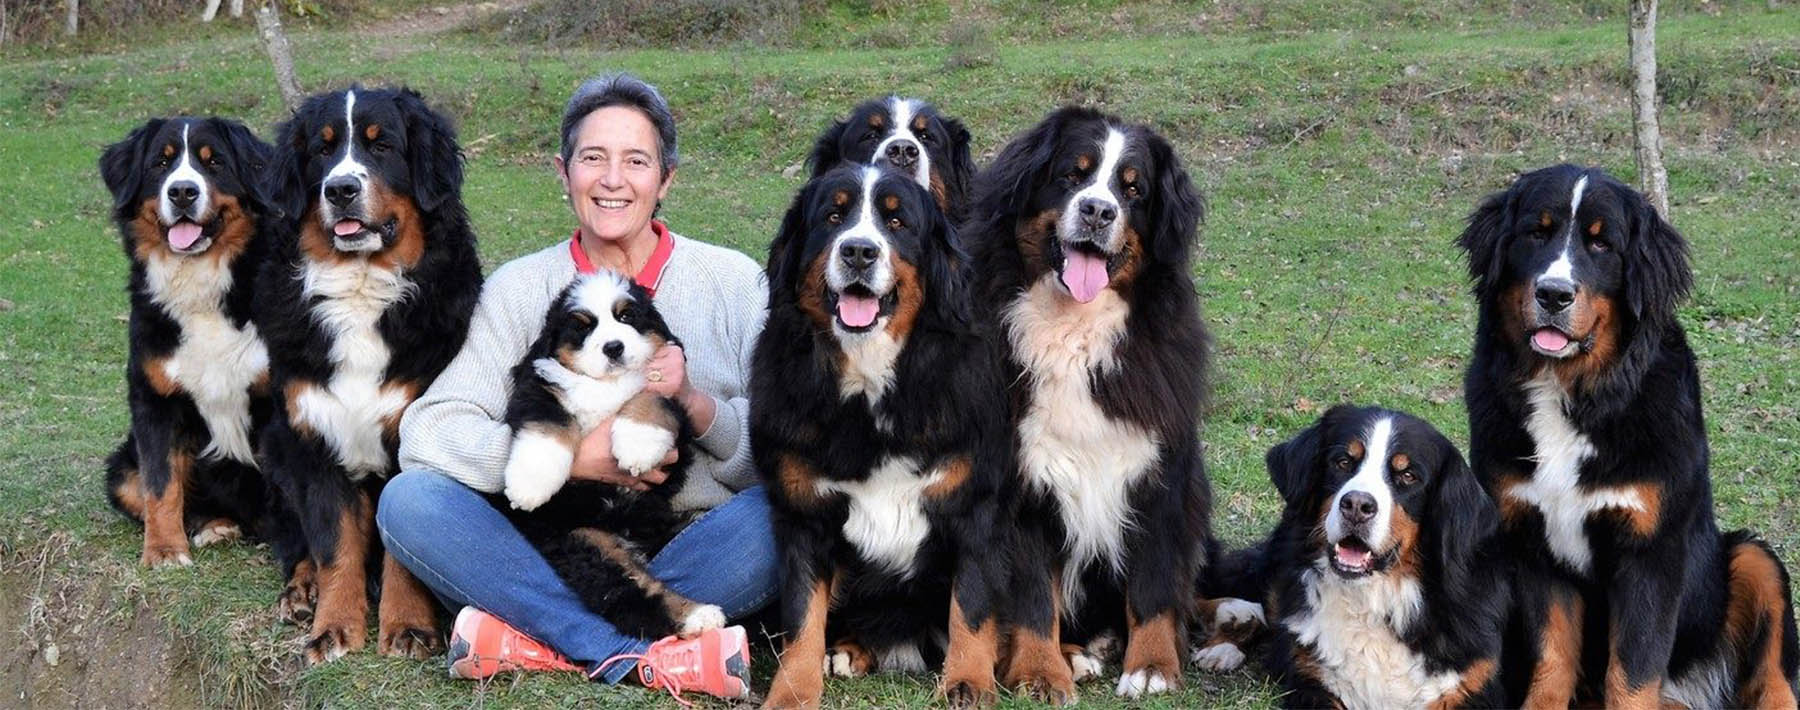 Smiling lady with dogs